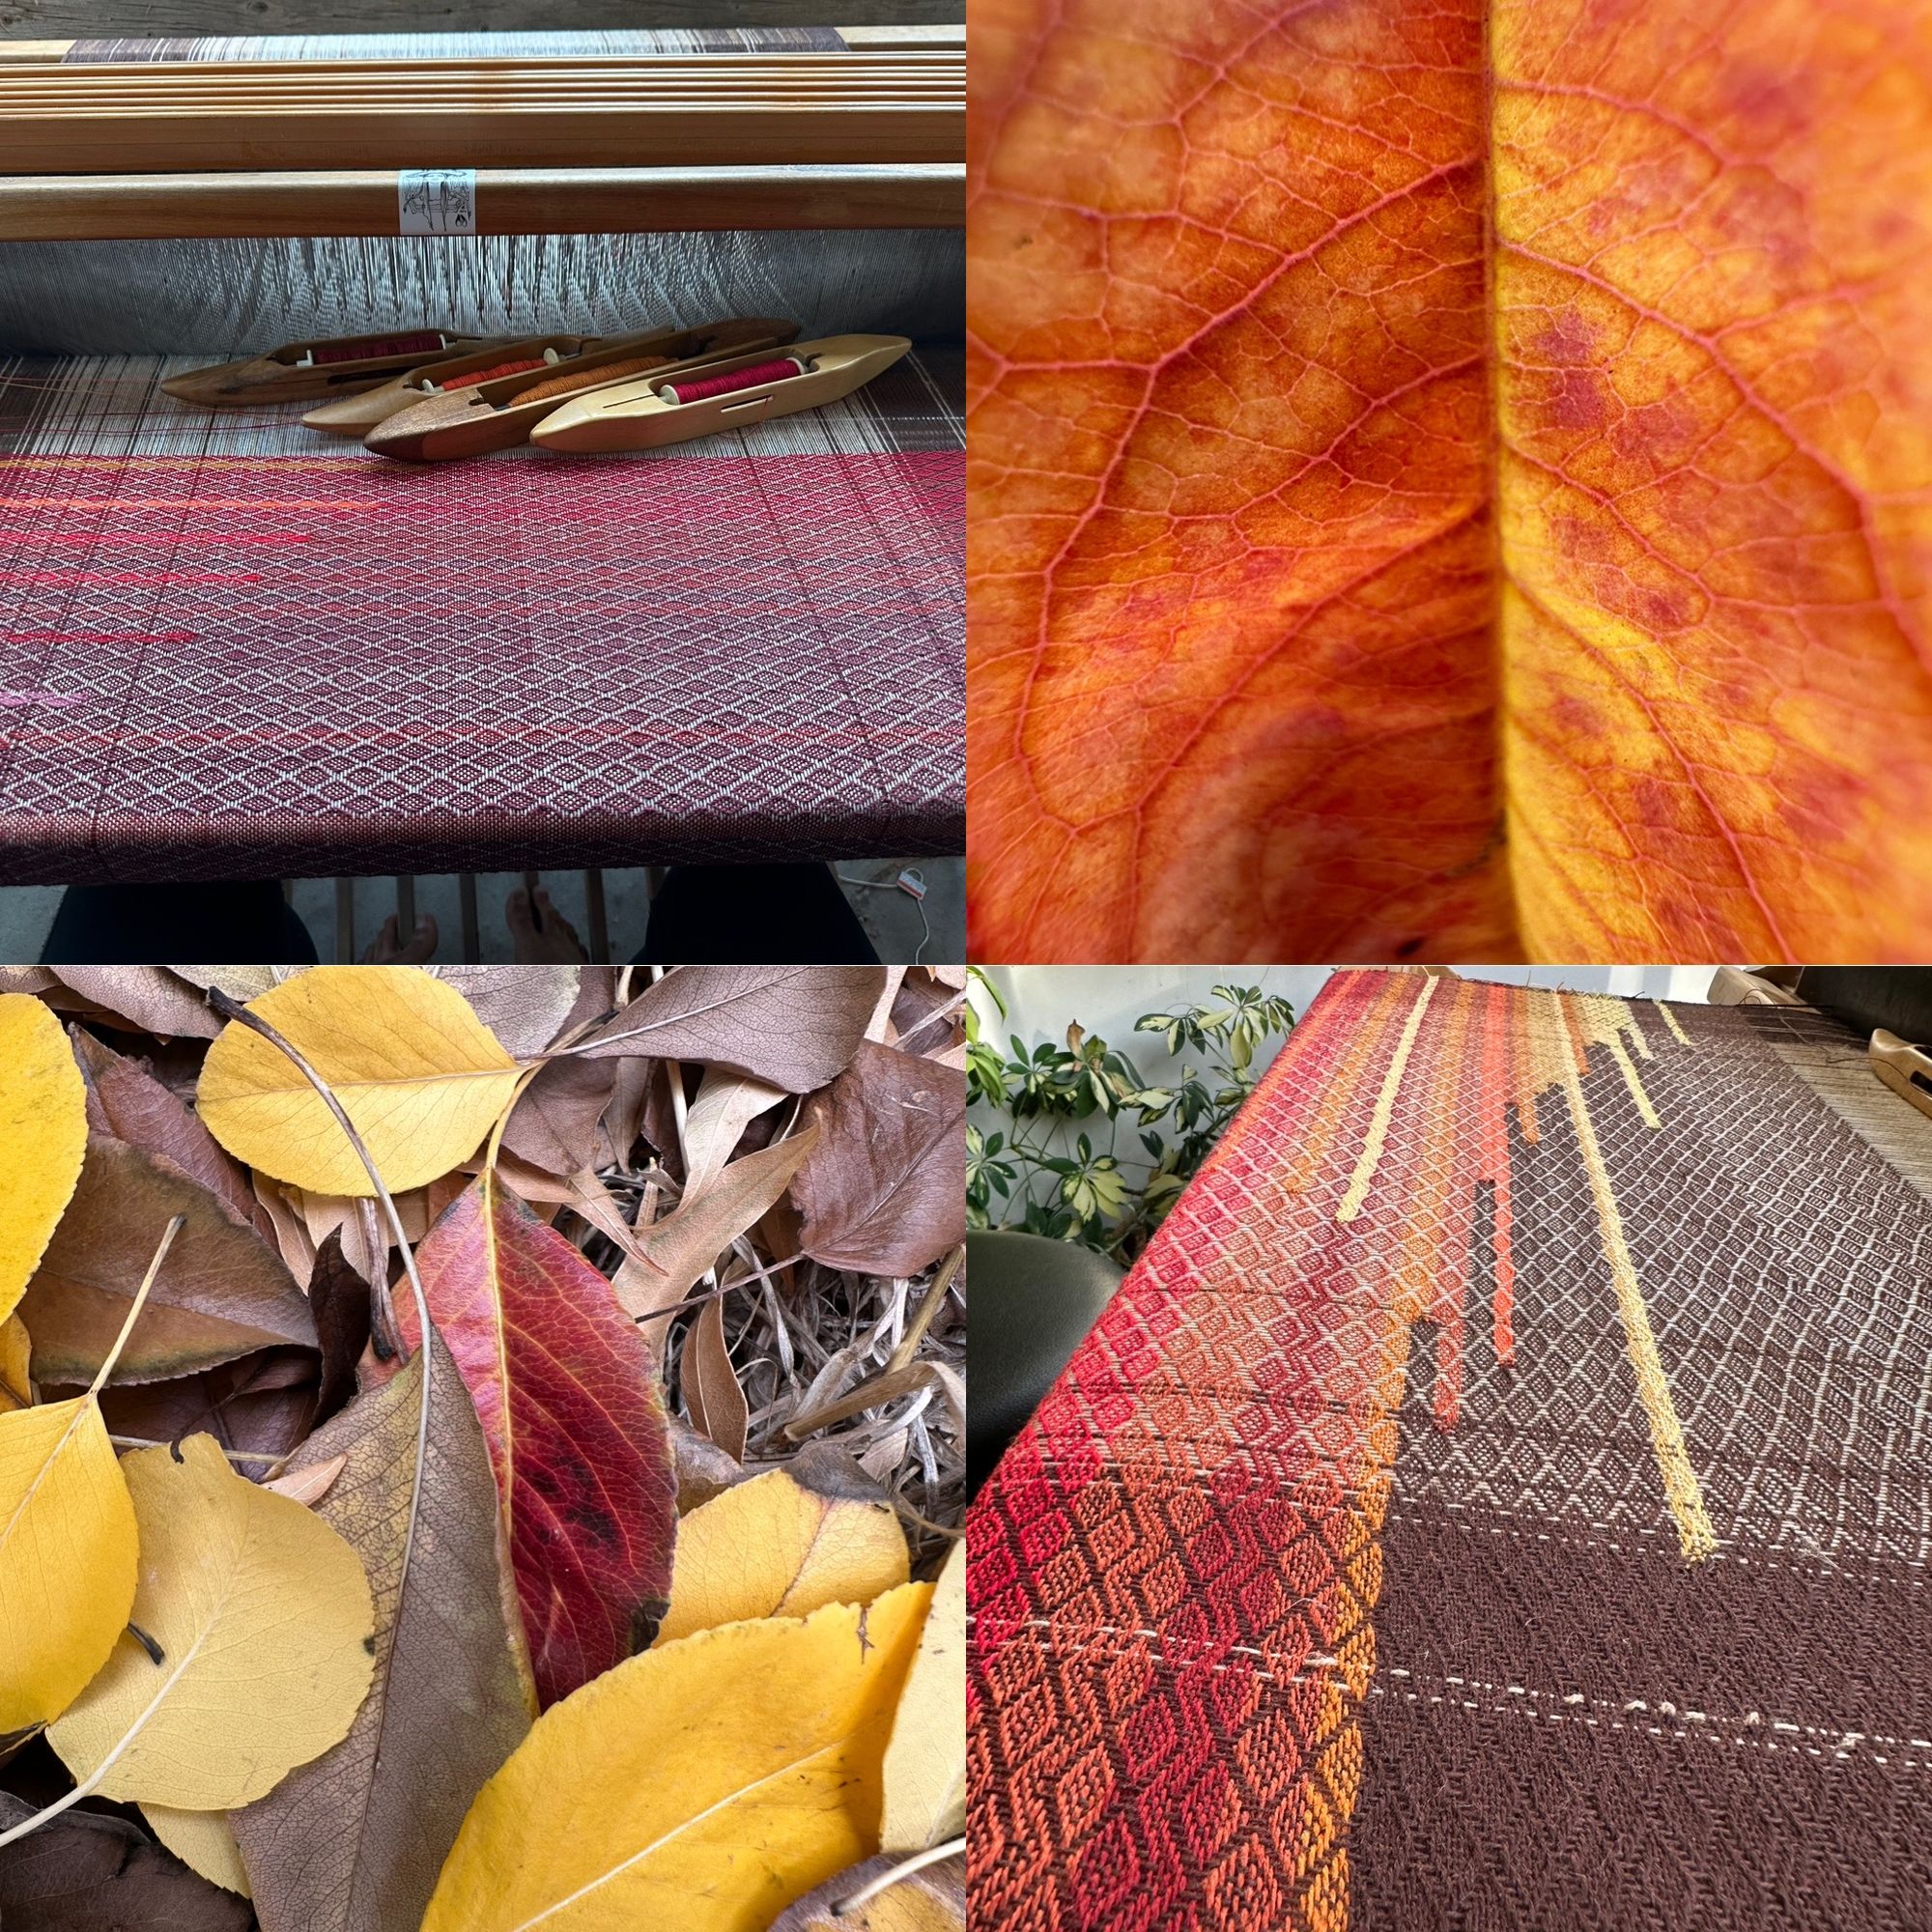 Four photos in a grid, two of the brown, orange, red and yellow leaves of fall, two of a loom with a weaving in progress, woven in diamond pattern in the same colors as the leaves